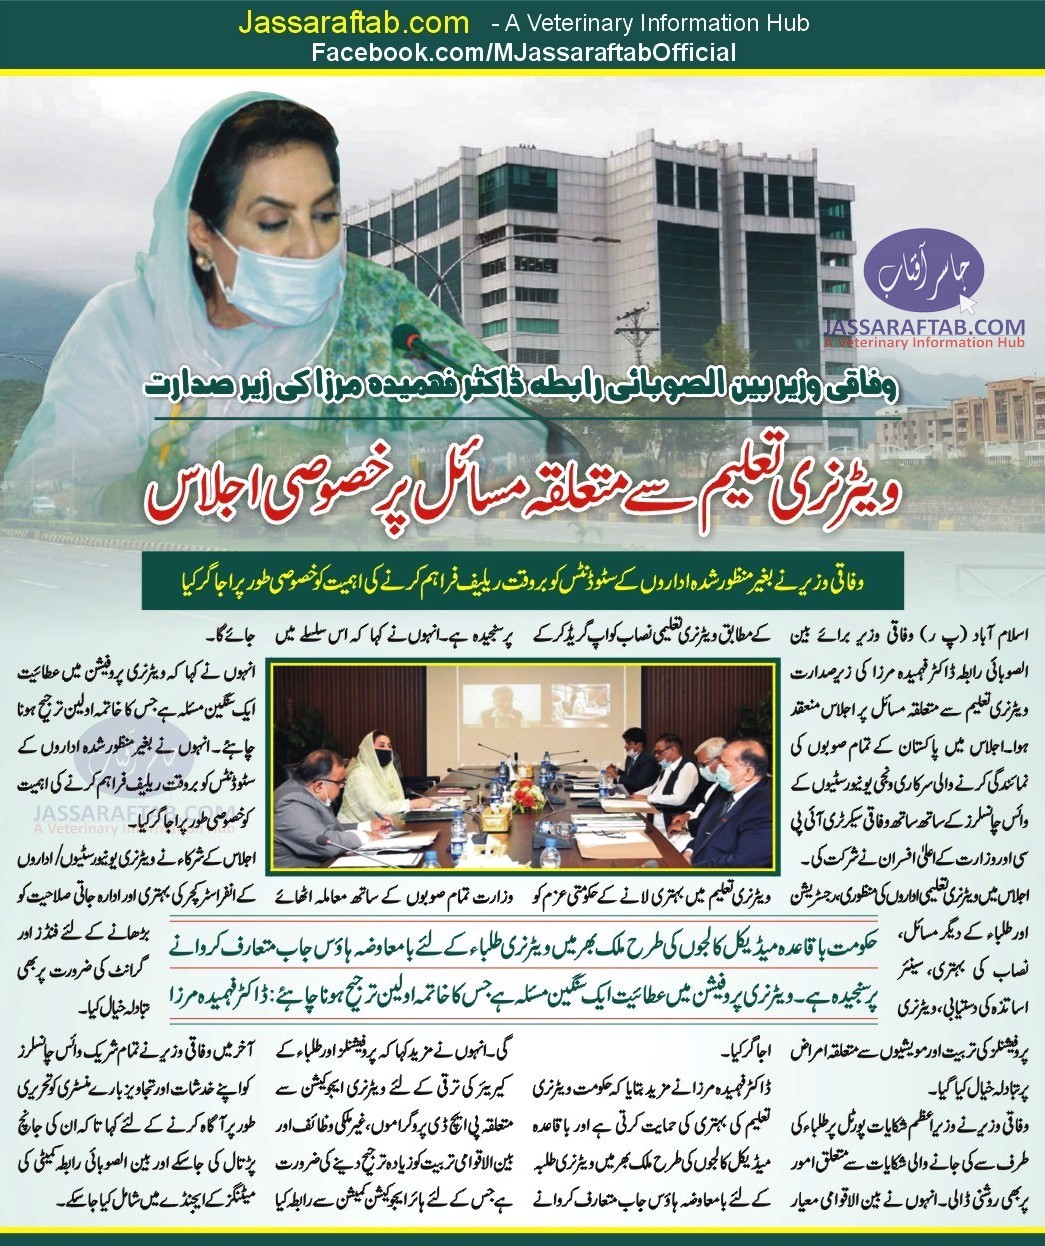 Federal Minister IPC discussed the matters of veterinary education 